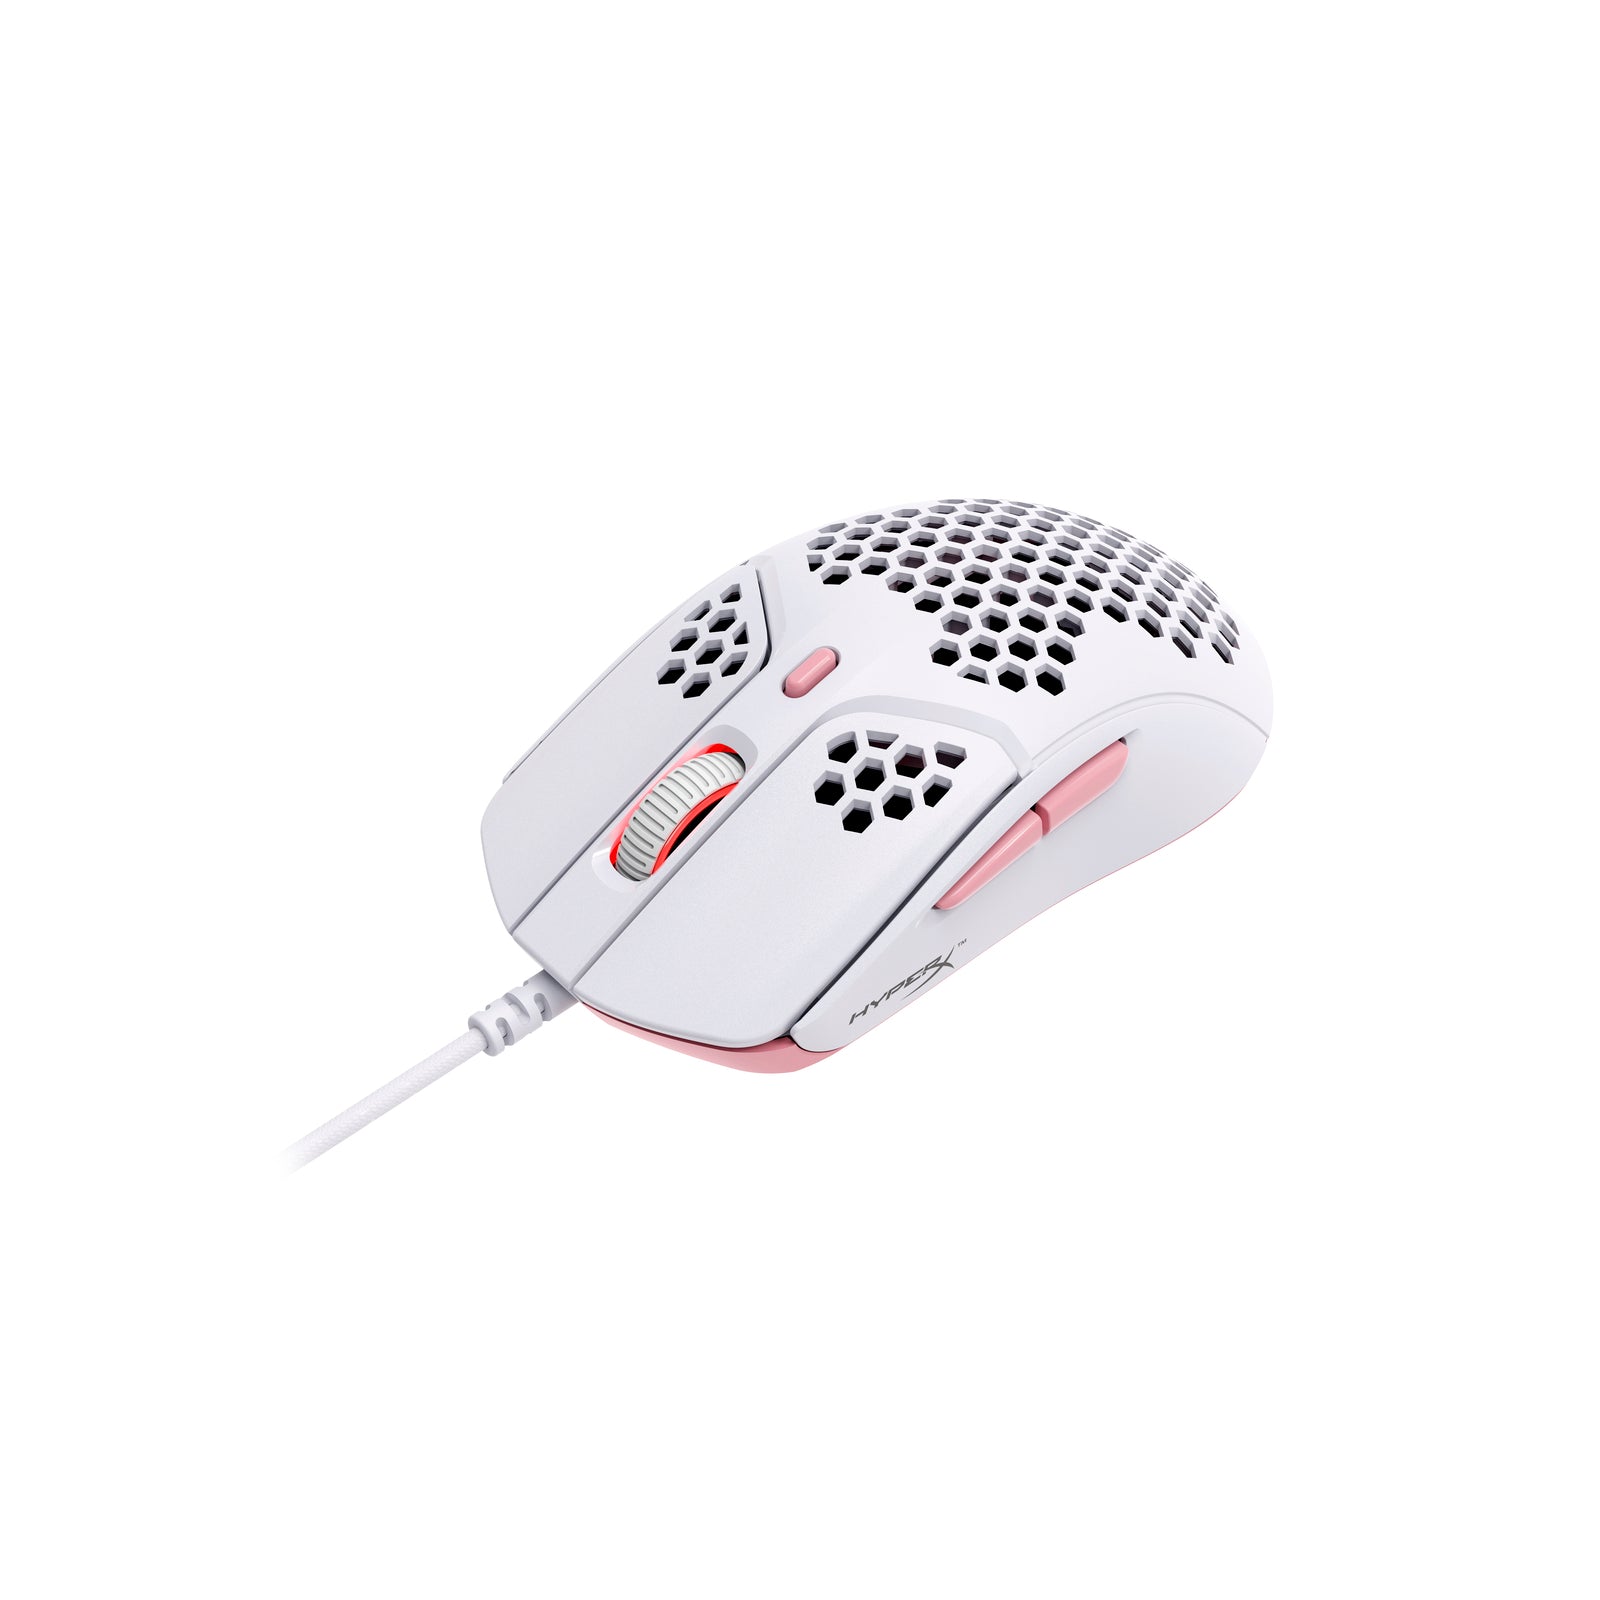 HyperX Pulsefire Haste White-Pink Gaming Mouse - angled view from the right side